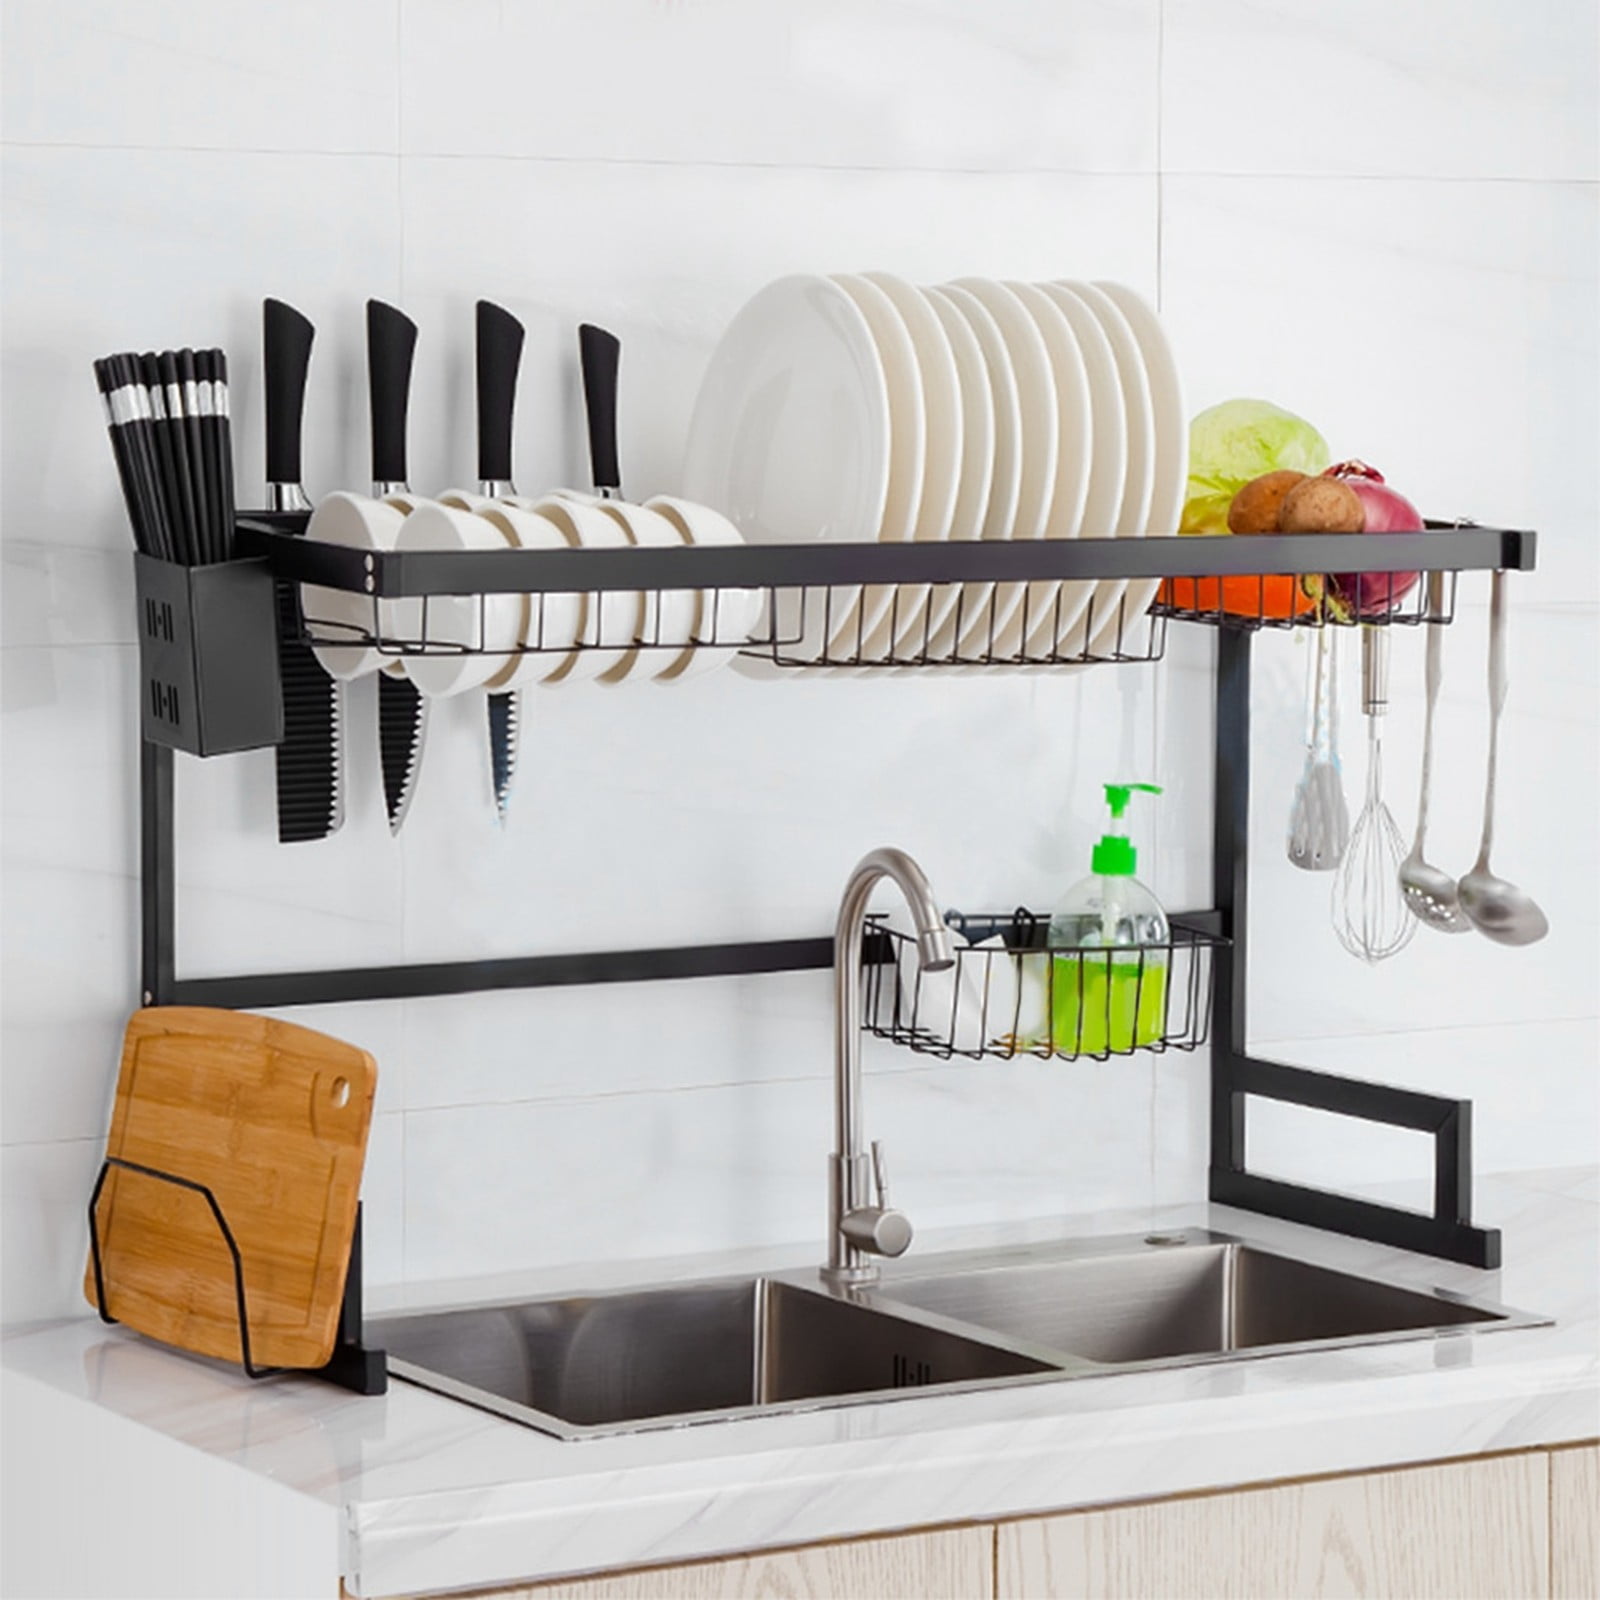 Details about   Over Sink Dish Drainer Drying Rack Shelf Stainless Steel Kitchen Cutlery Holder 